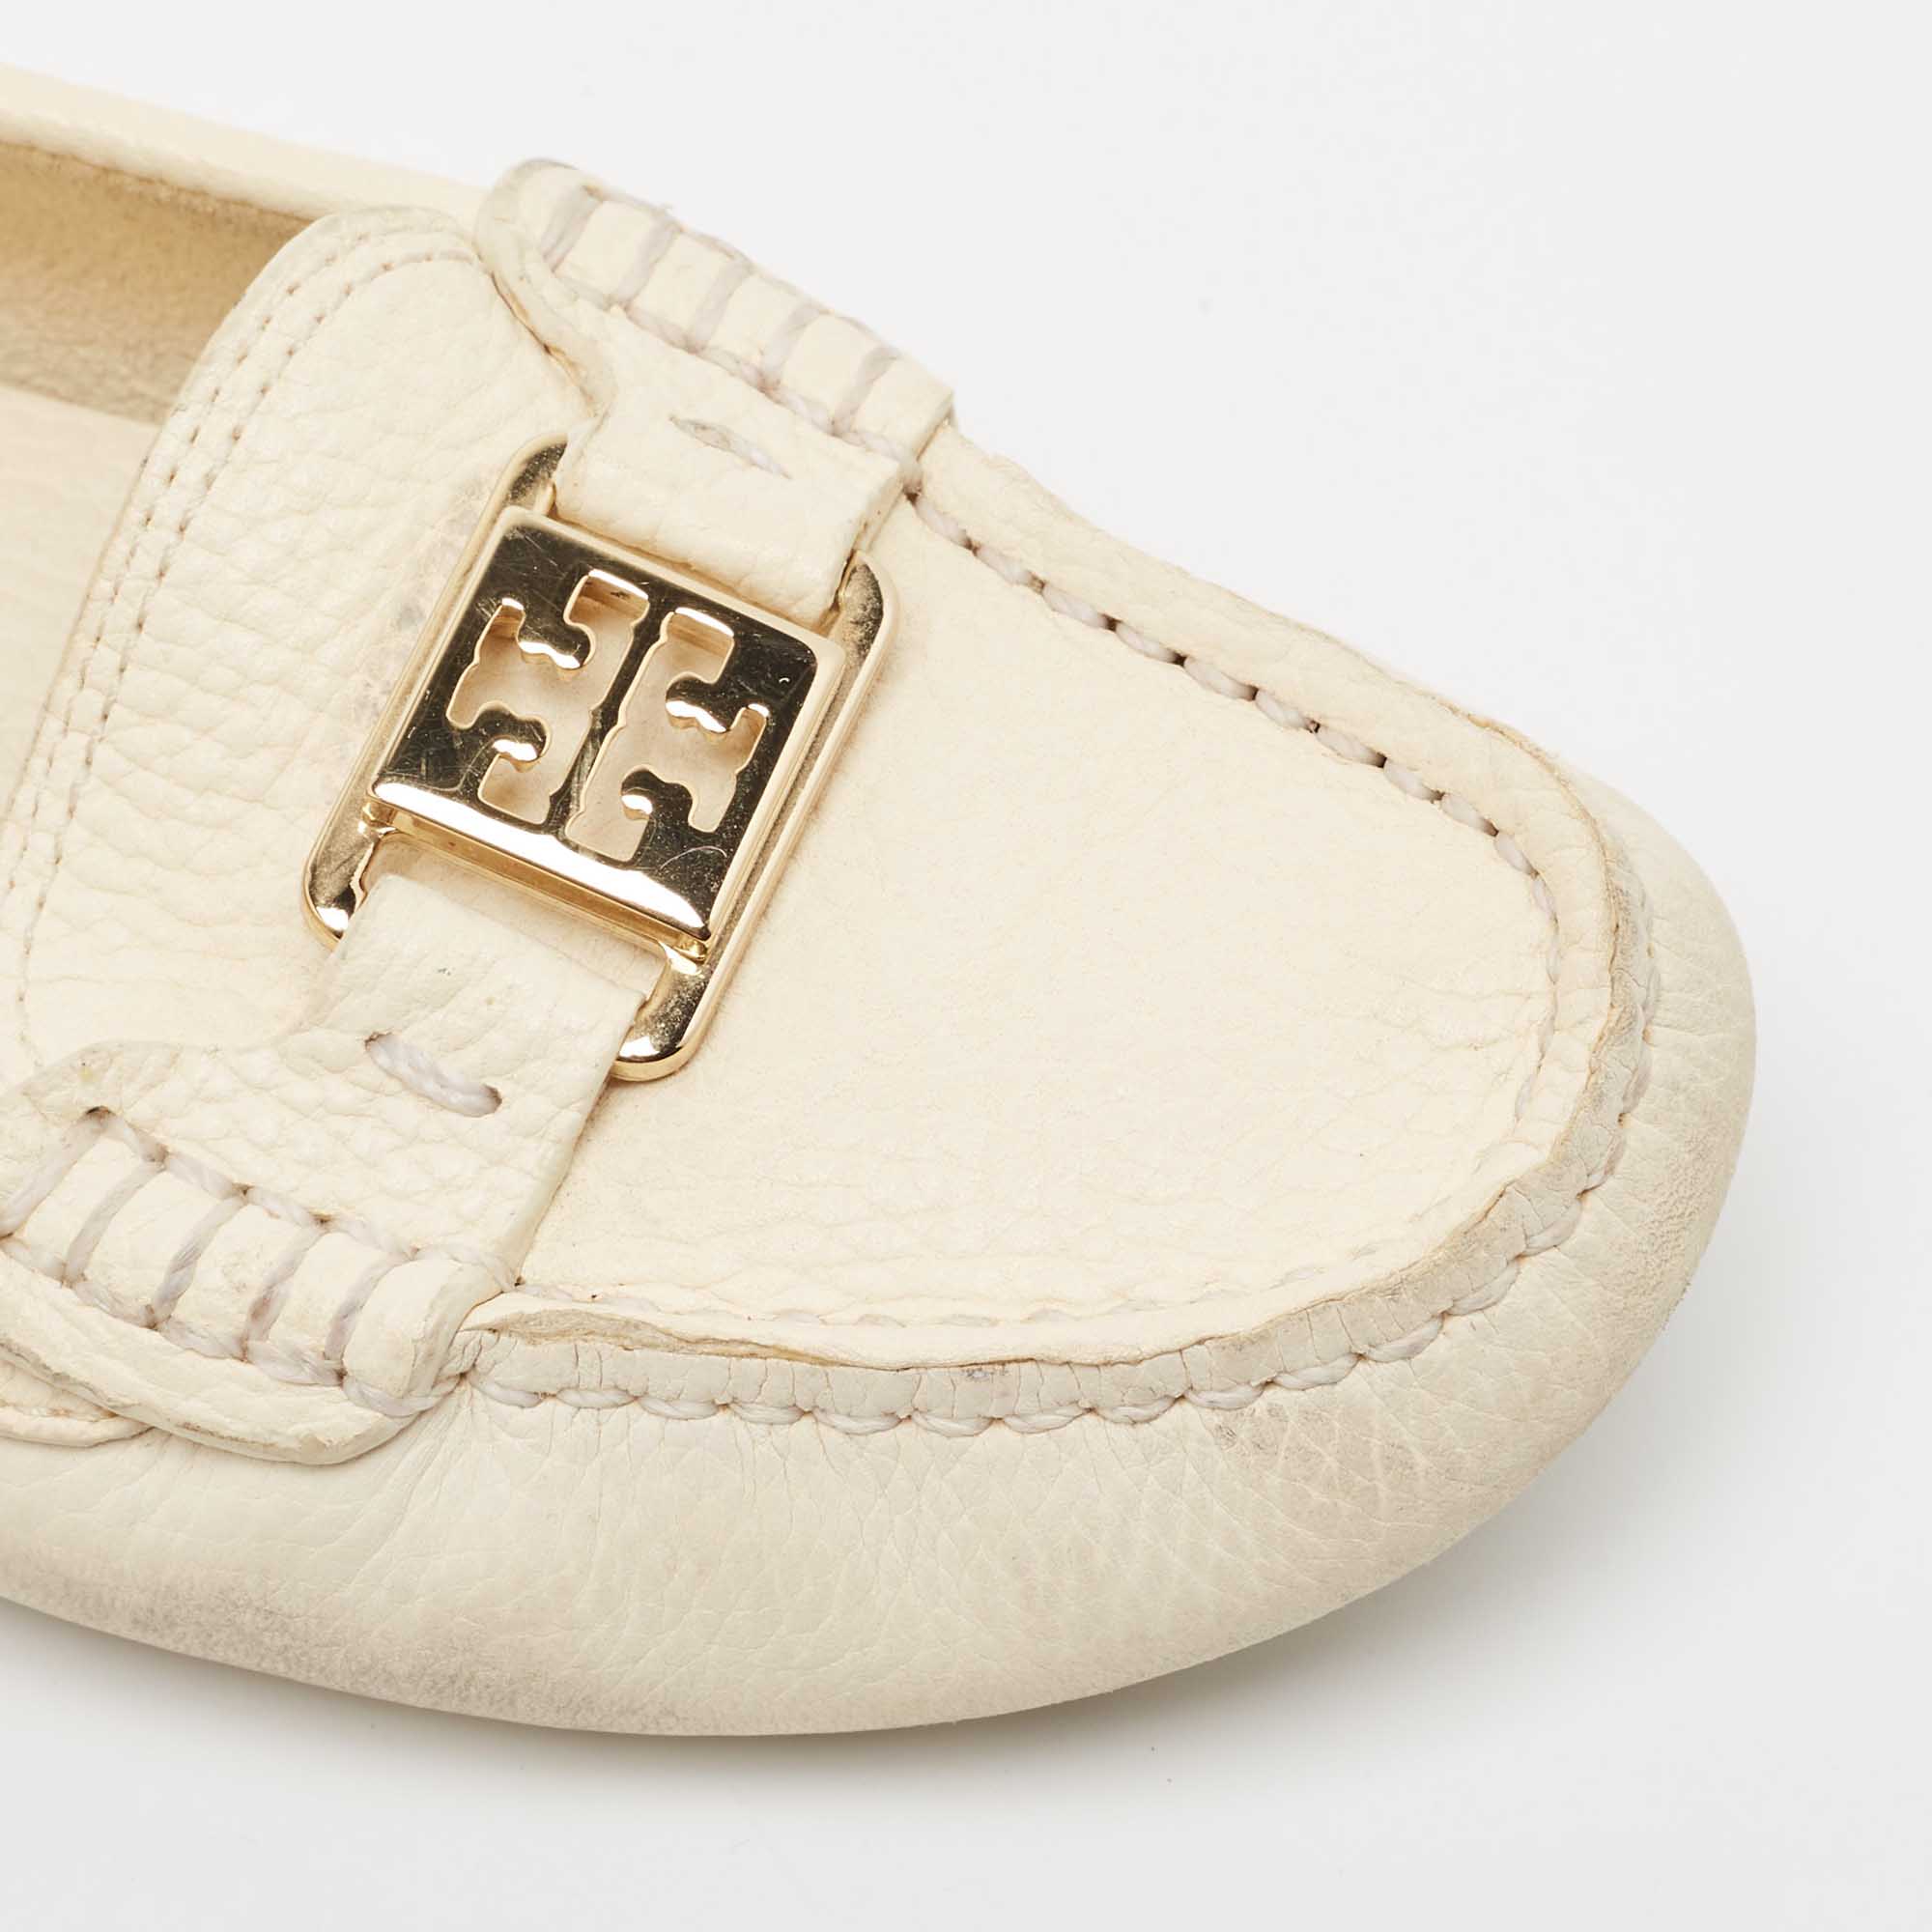 Tory Burch Cream Leather Kendrick Loafers Size 38